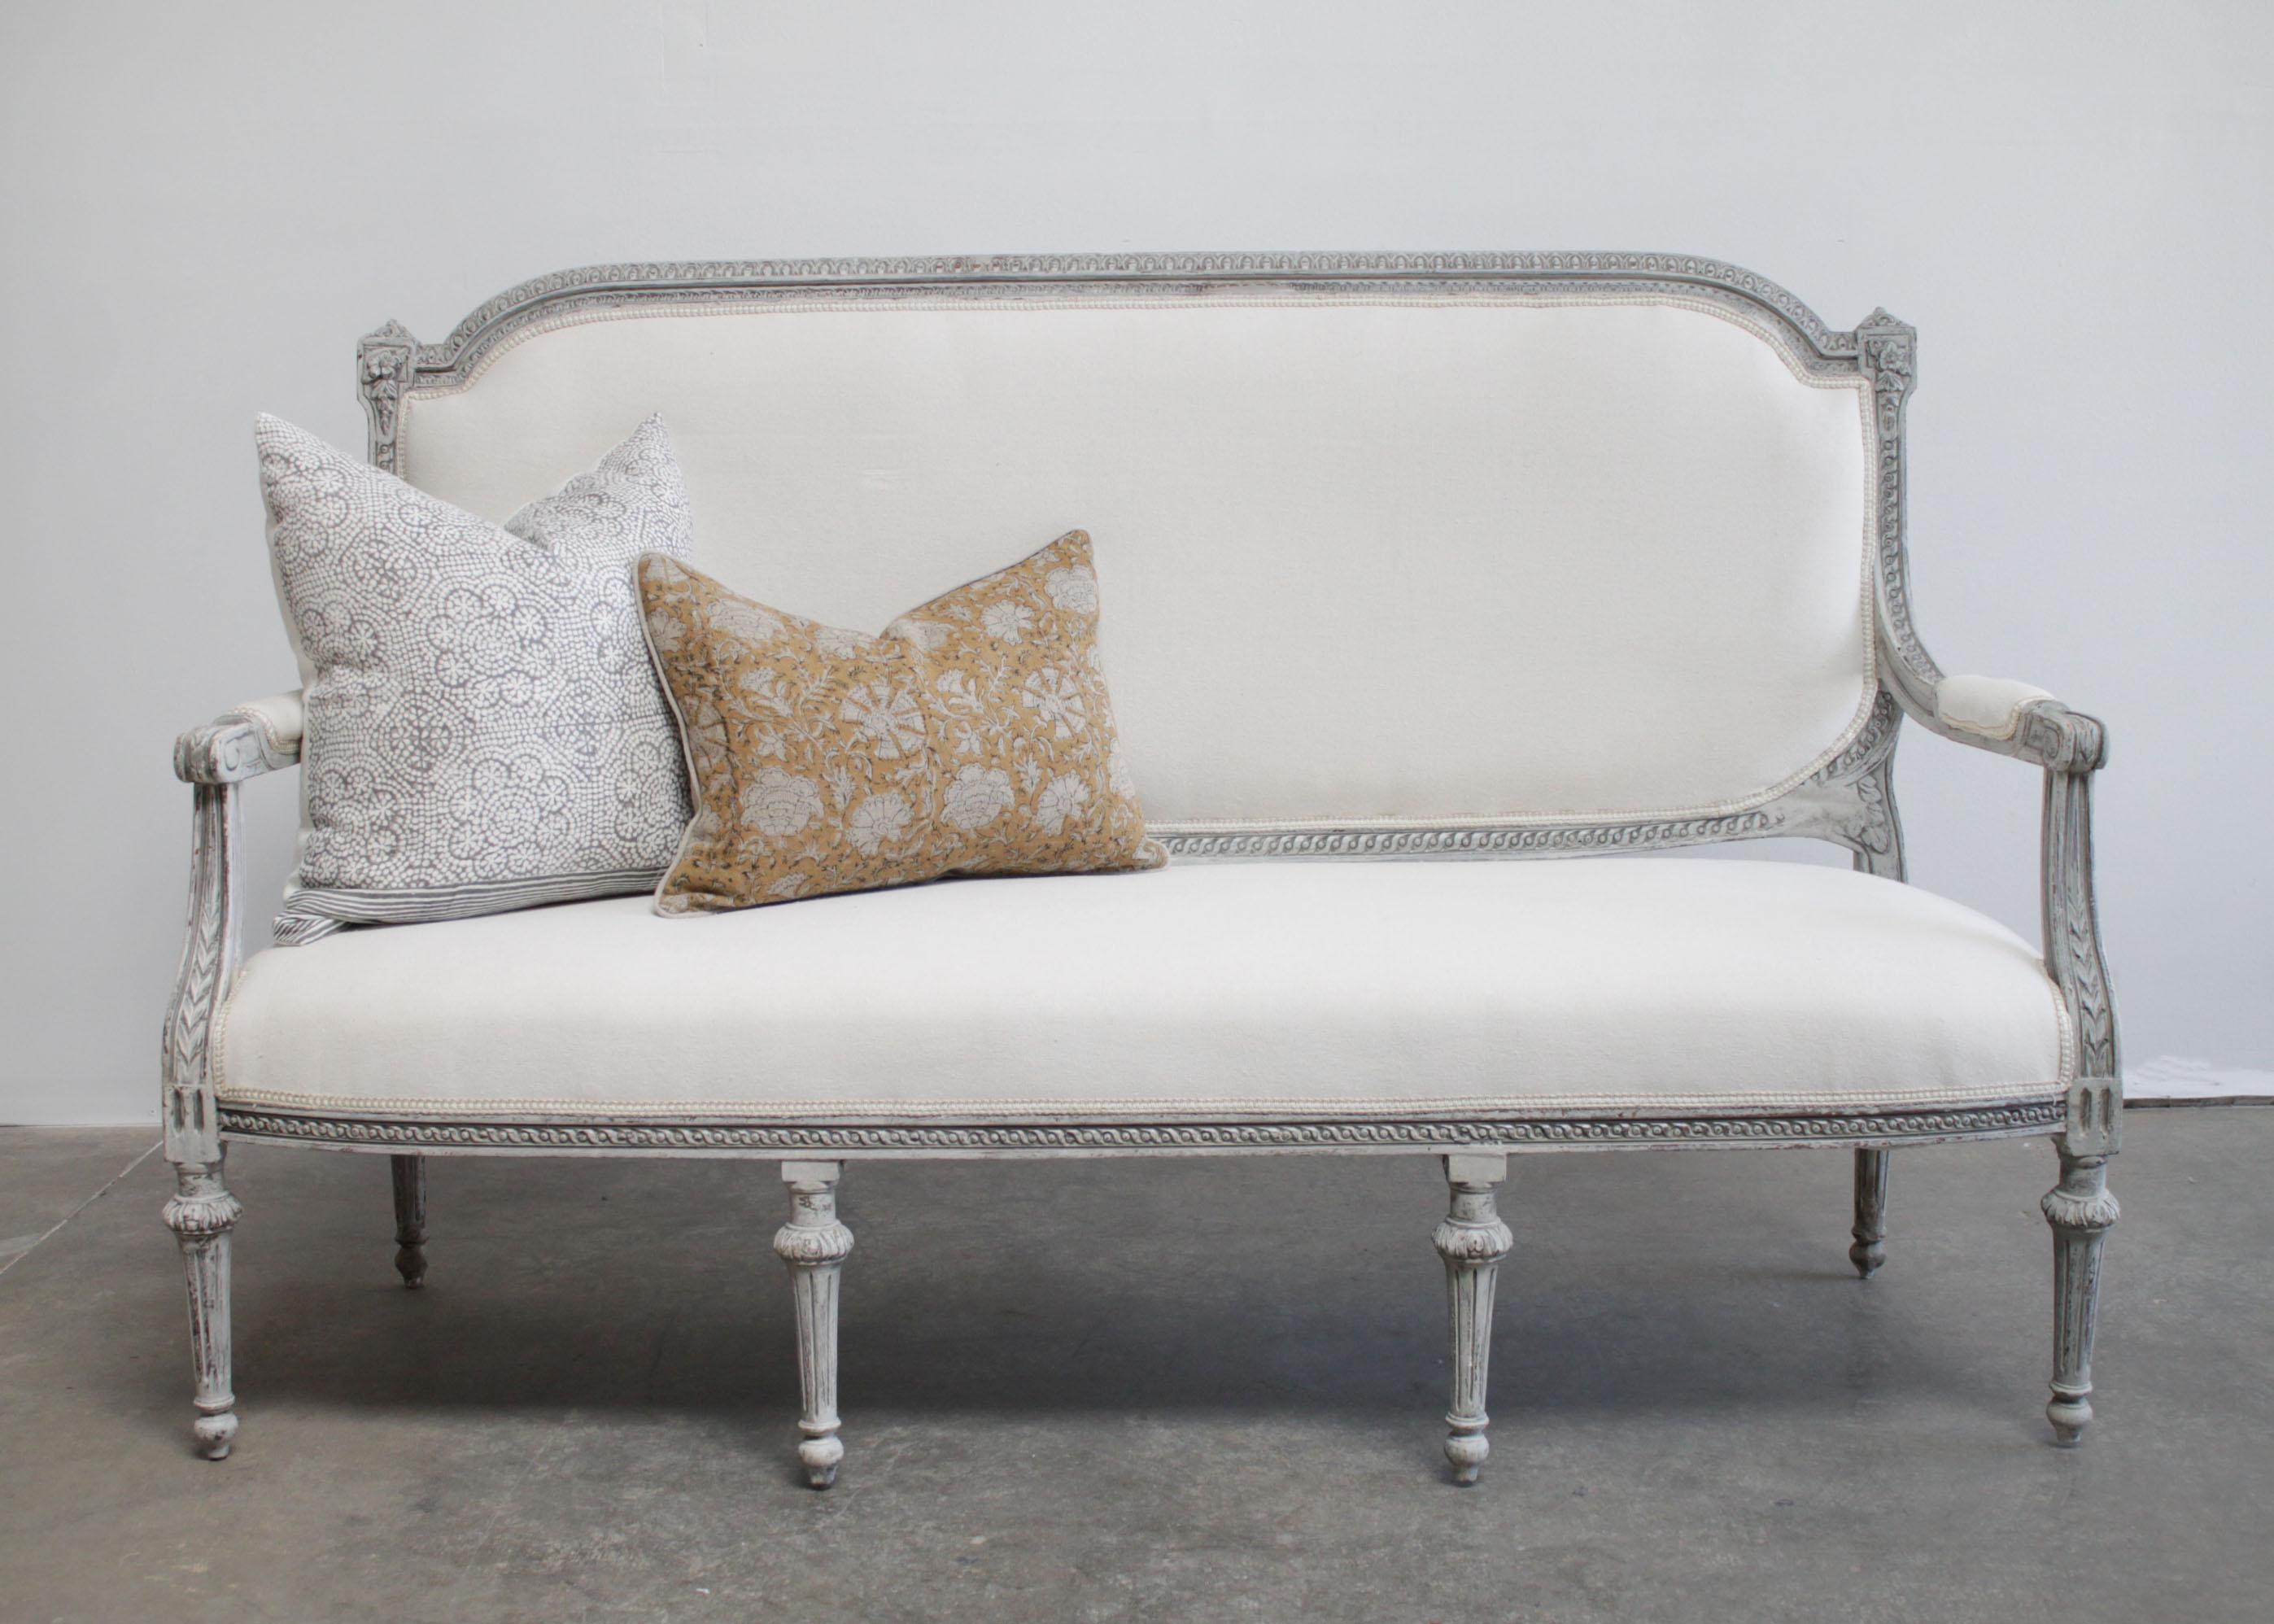 Vintage painted and upholstered Louis XVI style open arm sofa settee
Painted in a Gustavian gray with subtle distressed edges.
Classic fluted legs, with a medallion carving. A detailed carved frame with egg and dart carvings, and floral carved